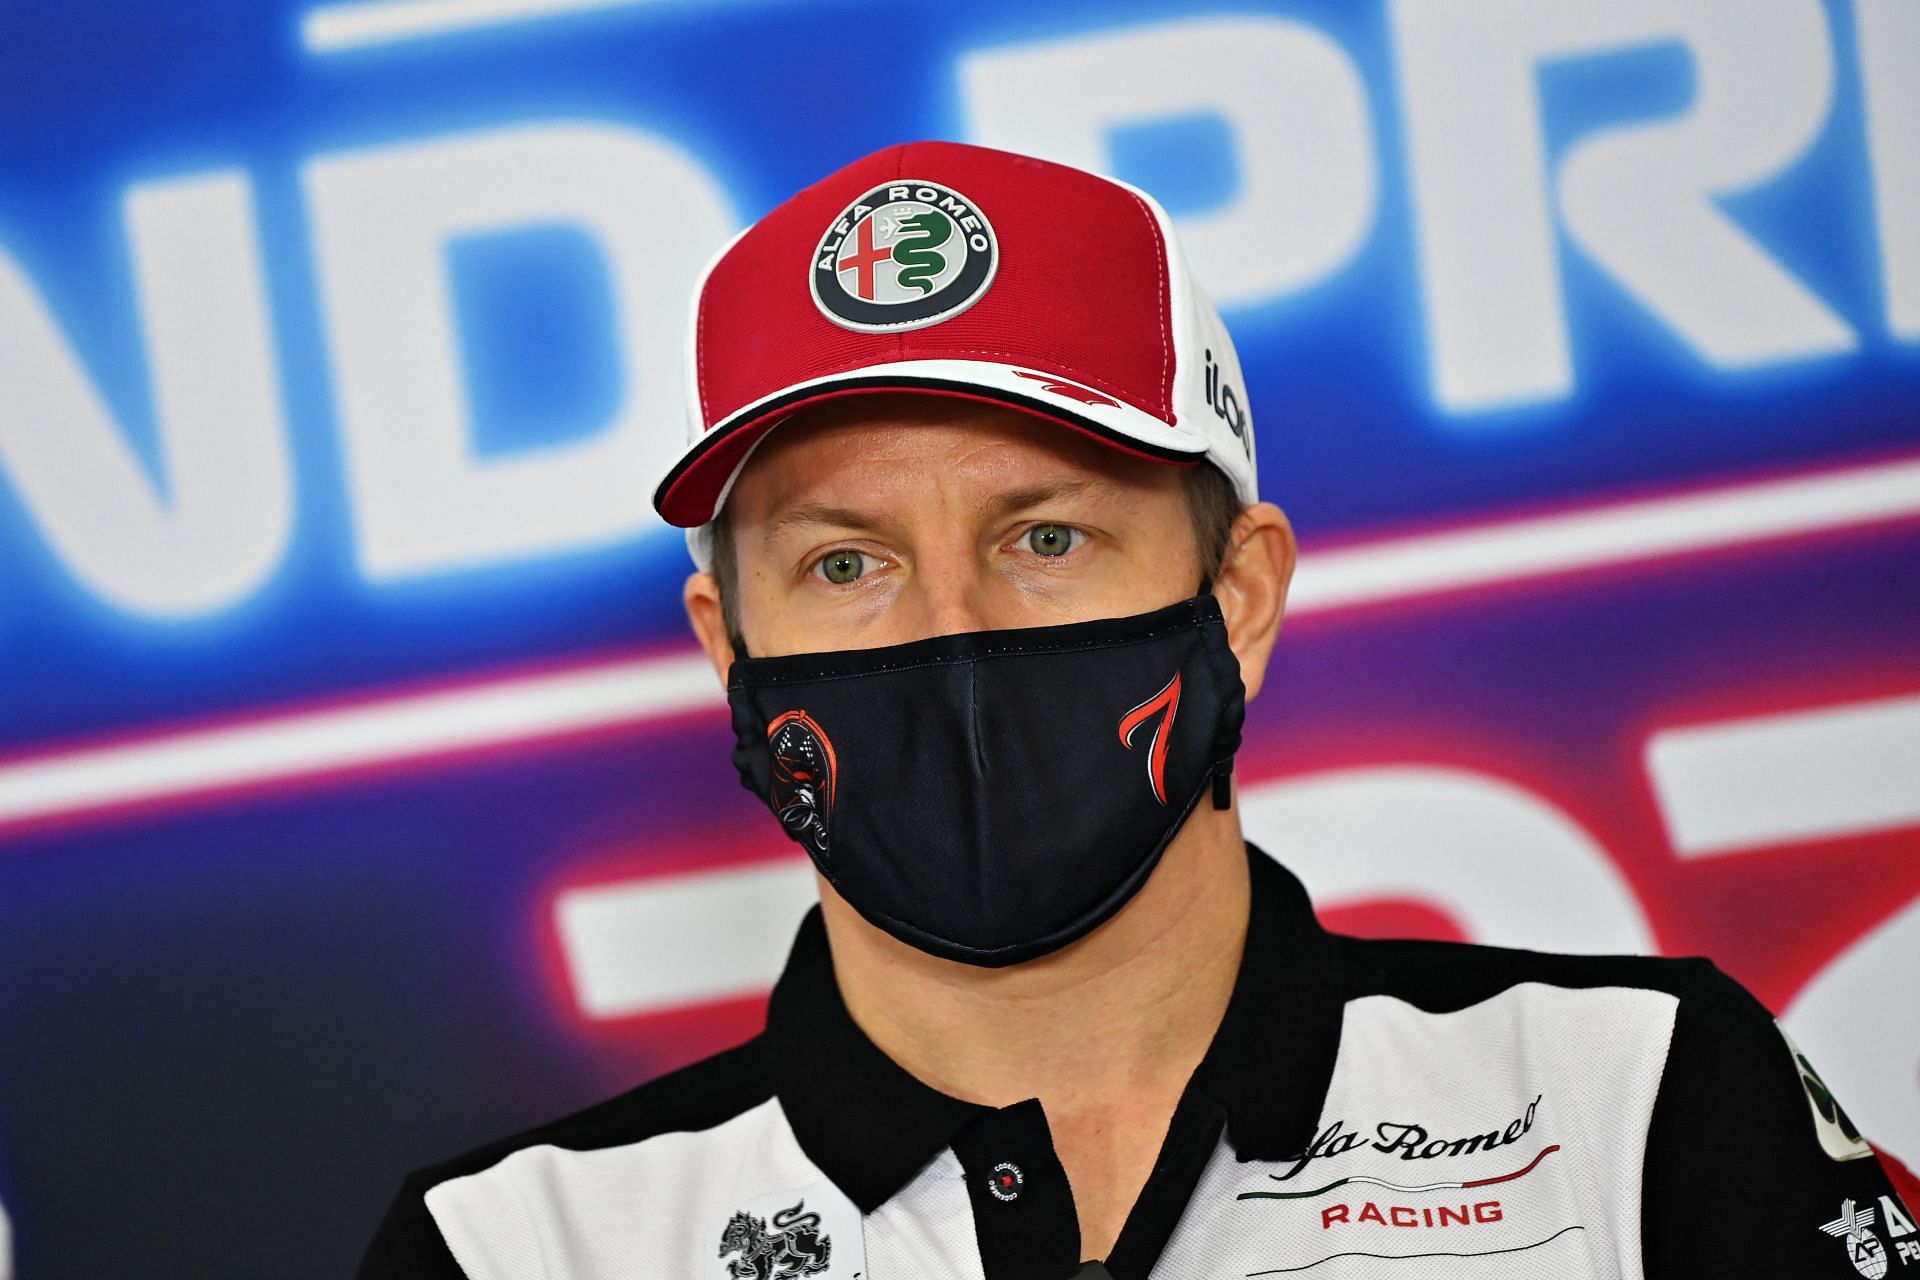 Kimi Raikkonen talks in the Drivers Press Conference during previews ahead of the F1 Grand Prix of Qatar at Losail International Circuit in 2021 (Image via Getty Images)